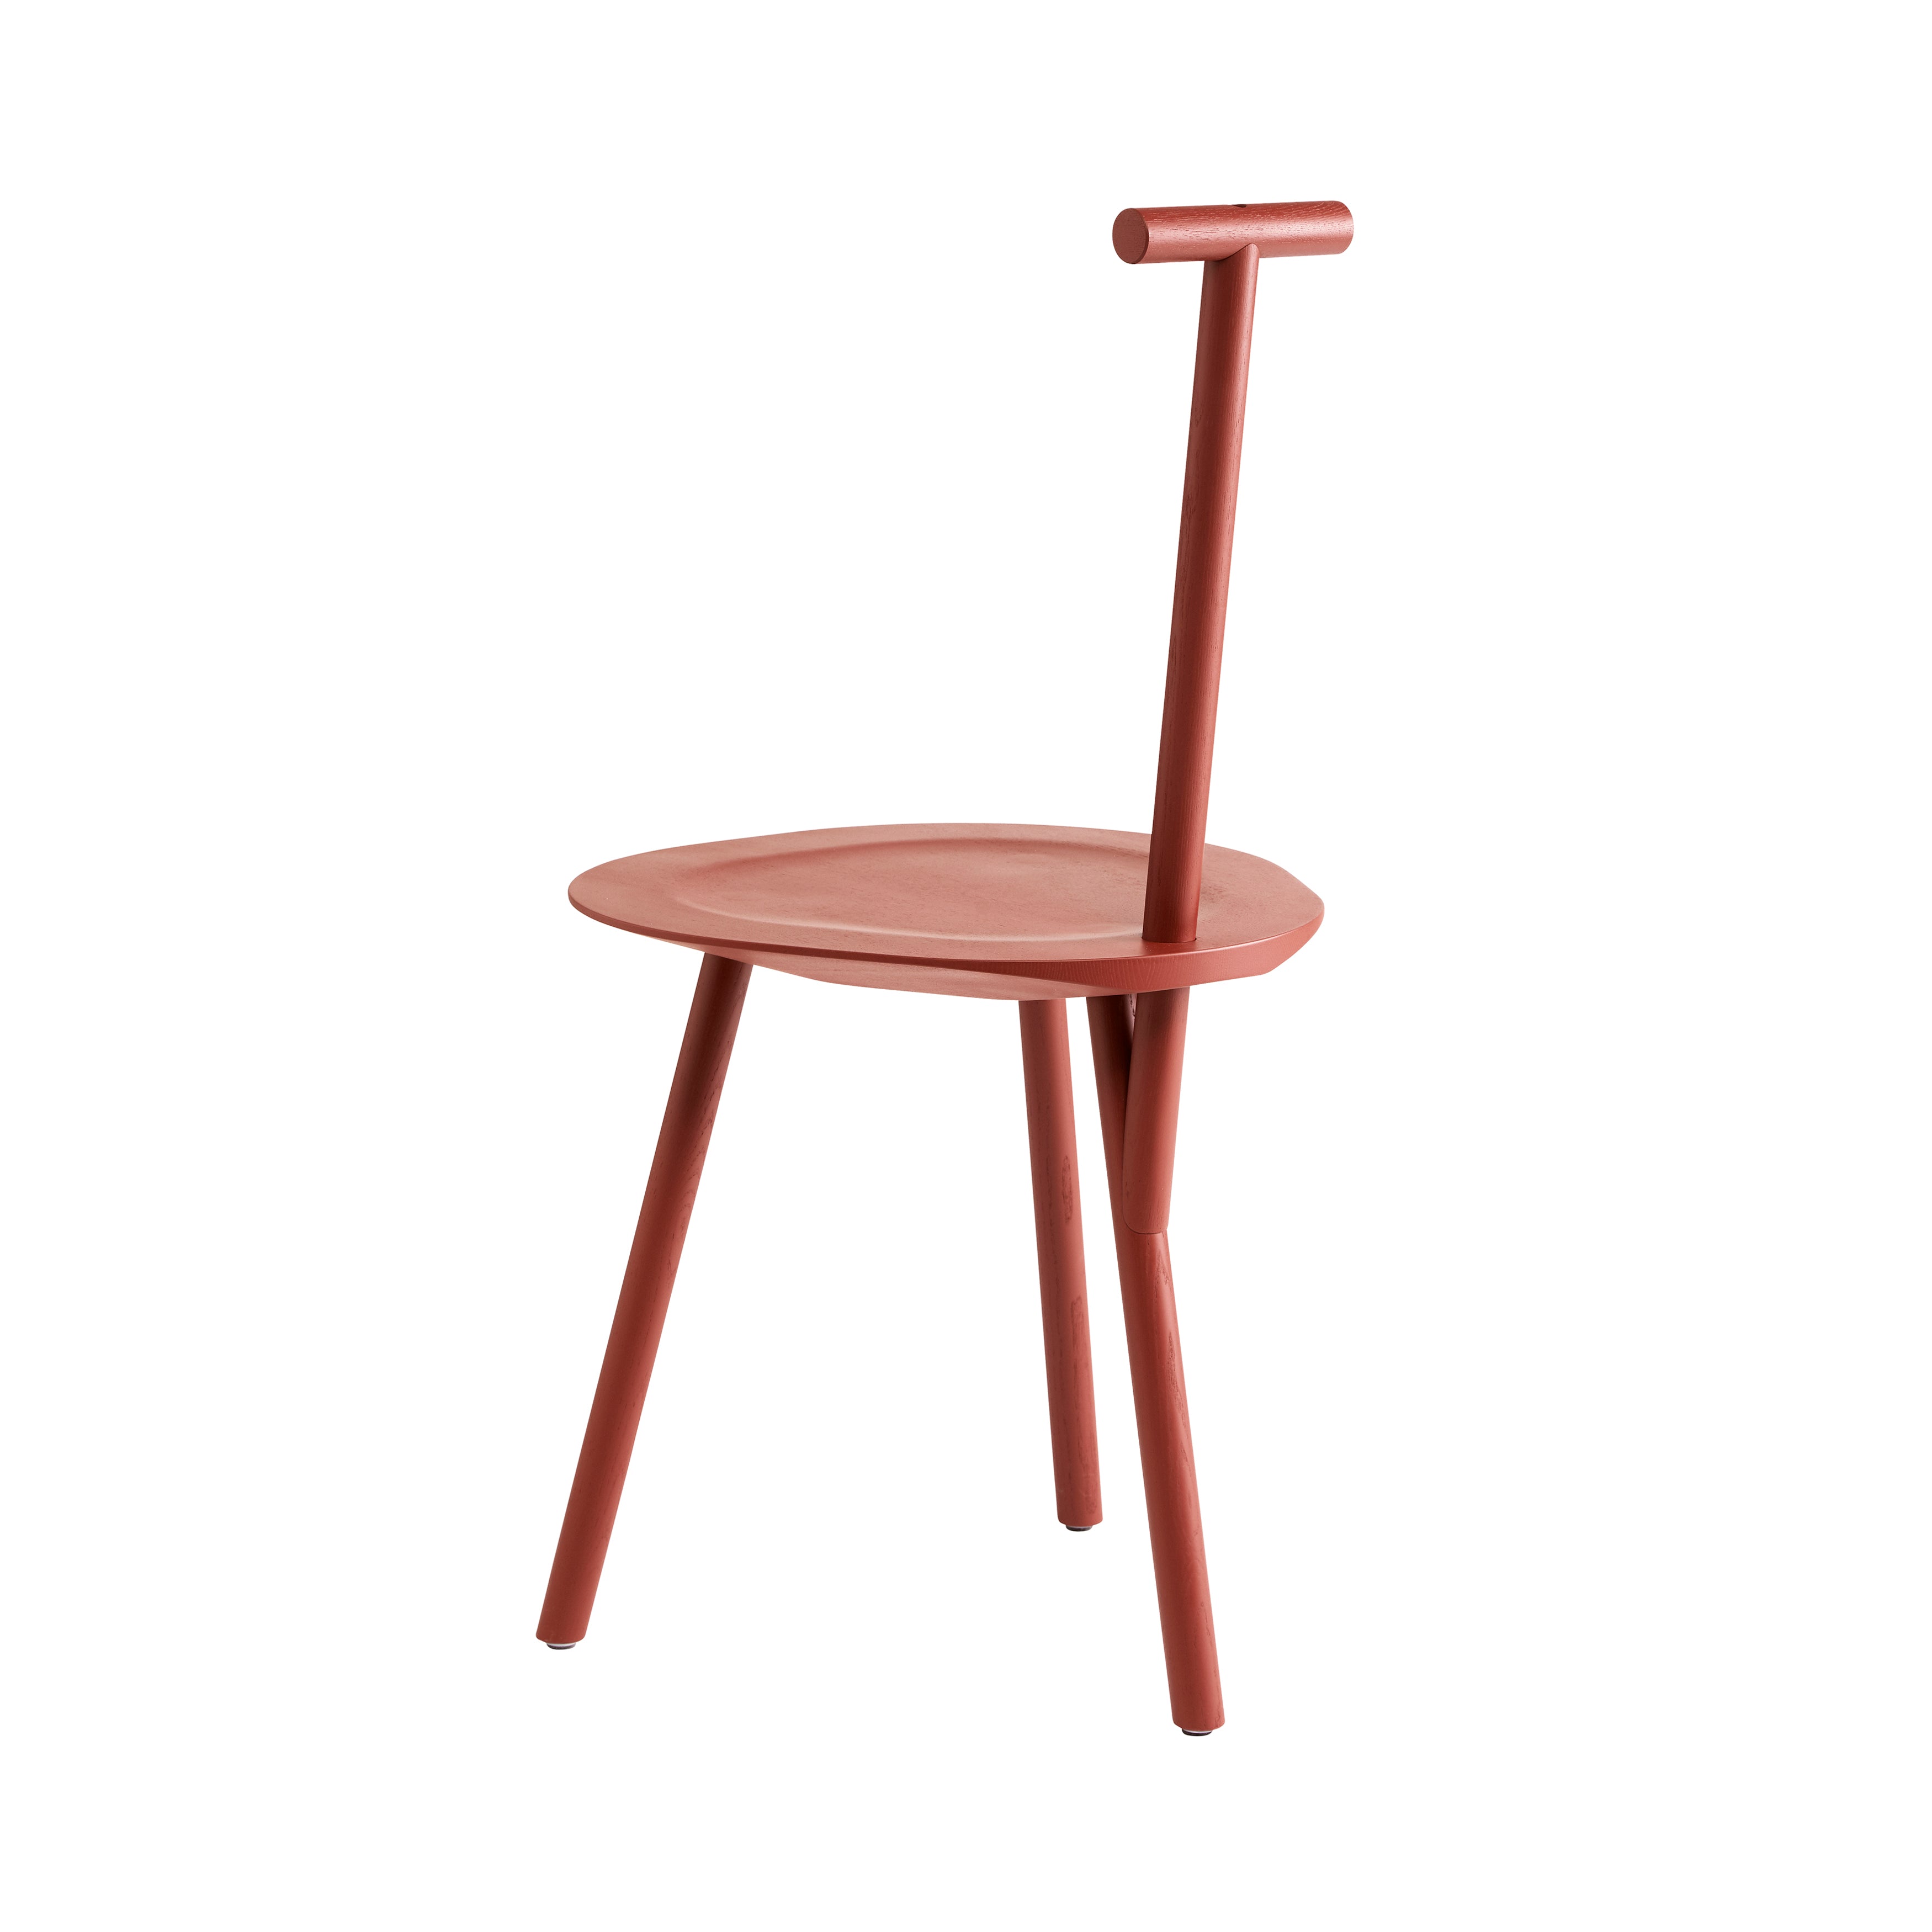 Spade Chair: Stained Basque Red